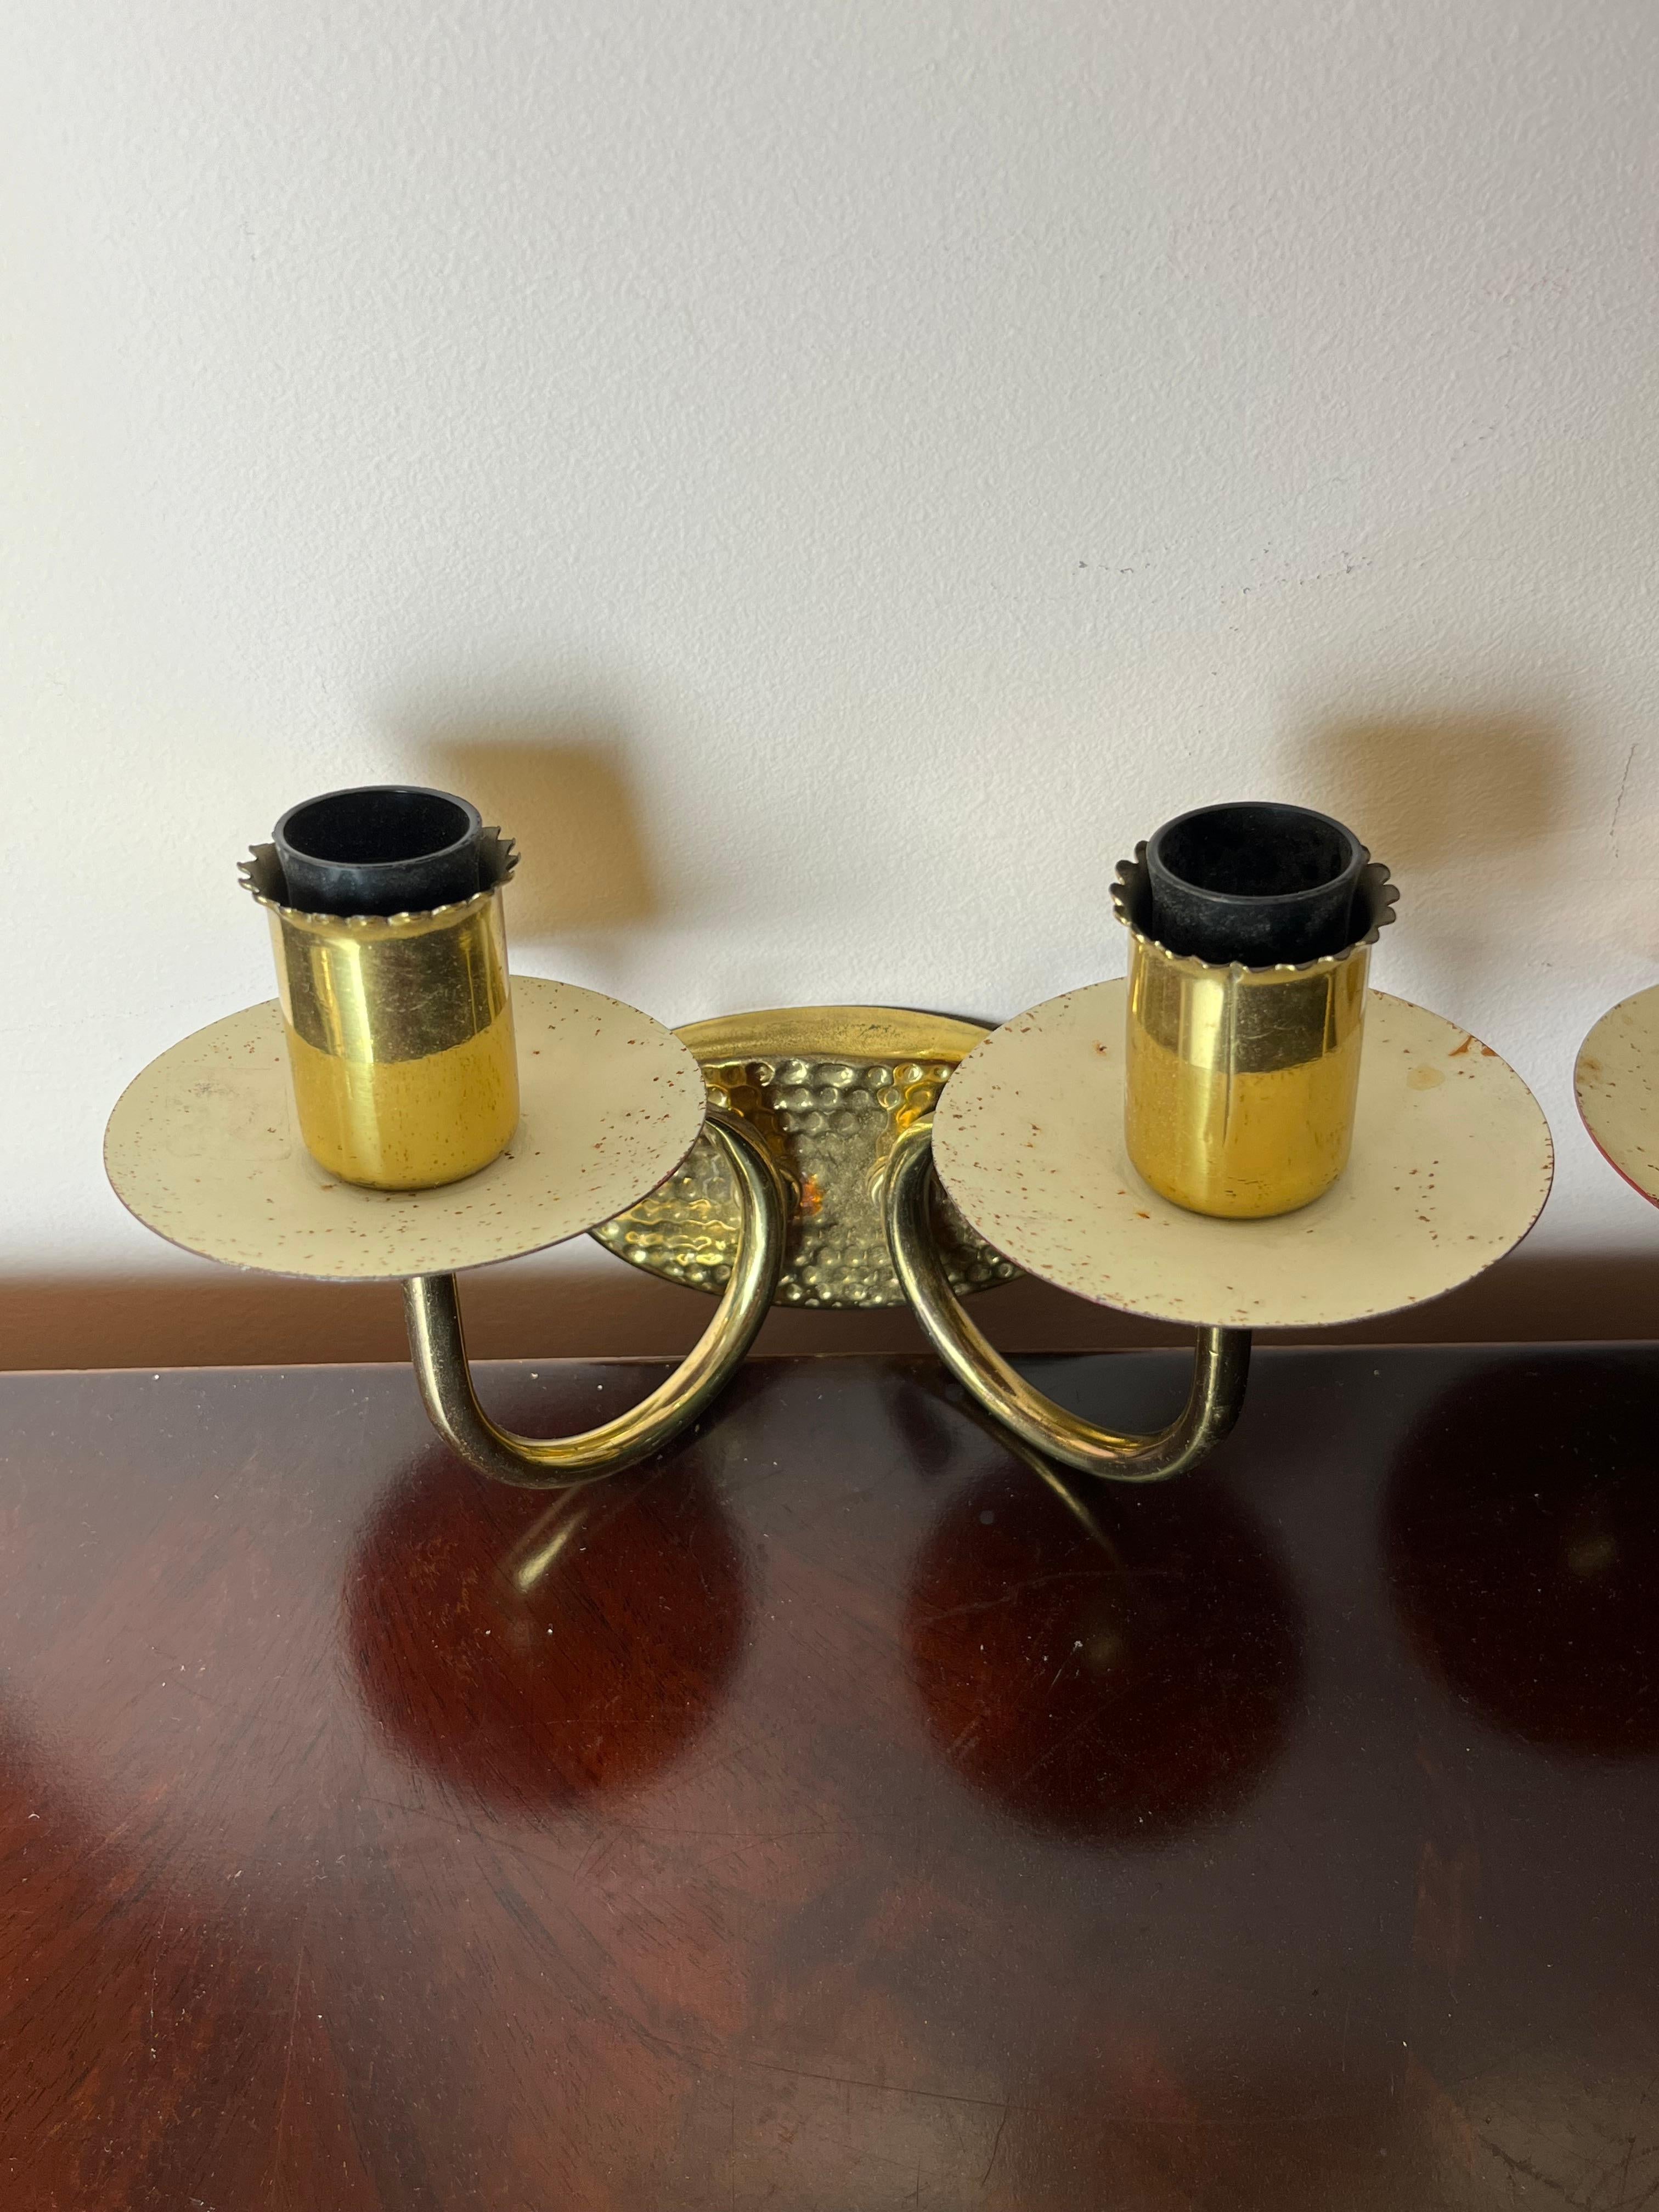 Italian Set of 2 Wall Lamps in Brass and Colored Aluminium, Made in Italy, 1950s For Sale